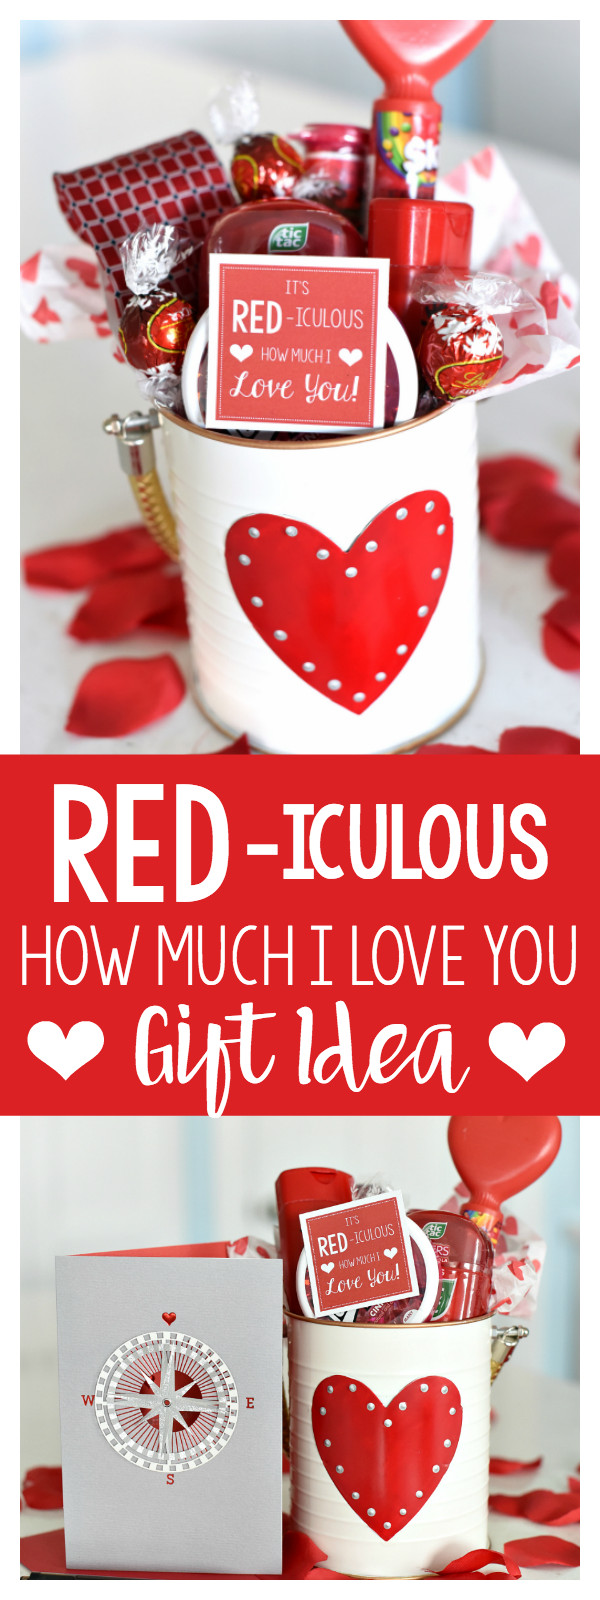 Unconventional Valentines Gift Ideas
 Cute Valentine s Day Gift Idea RED iculous Basket